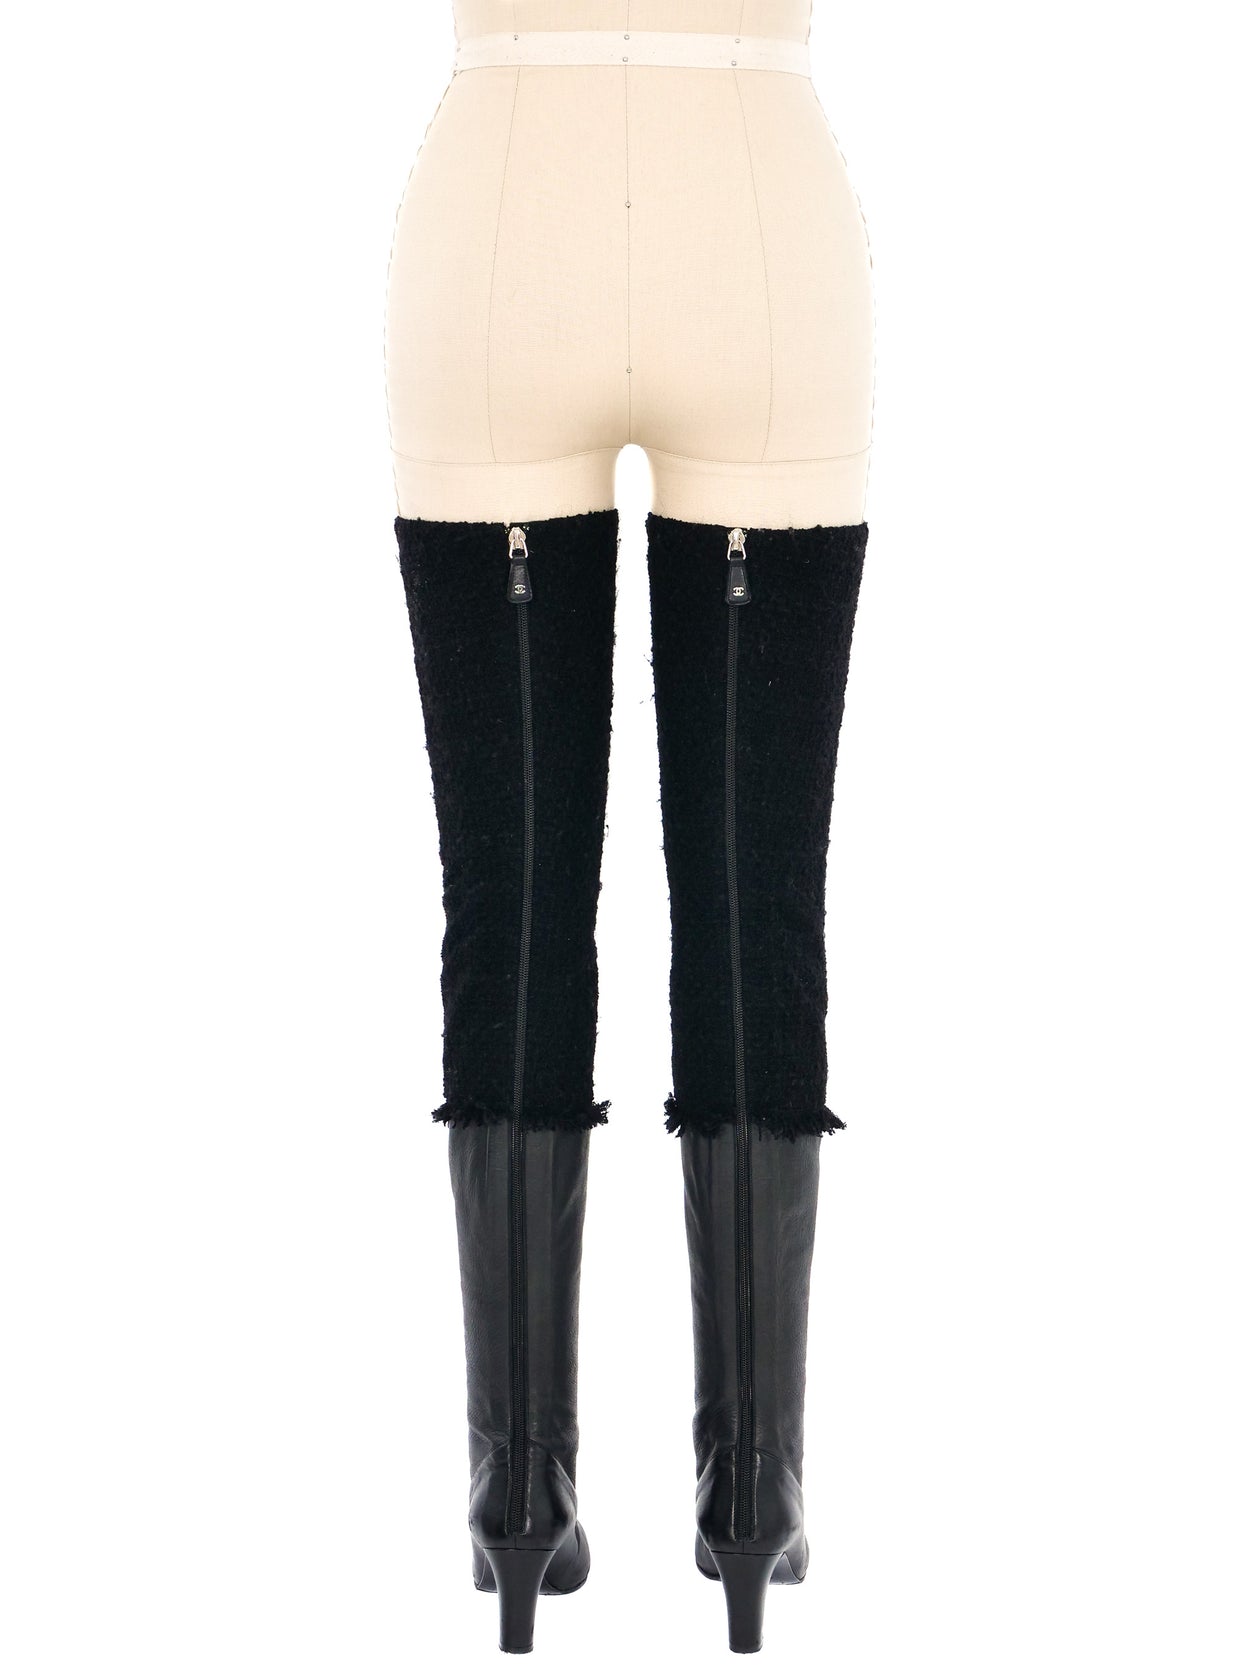 Chanel Suede Thigh High Boots with Gripoix Detail